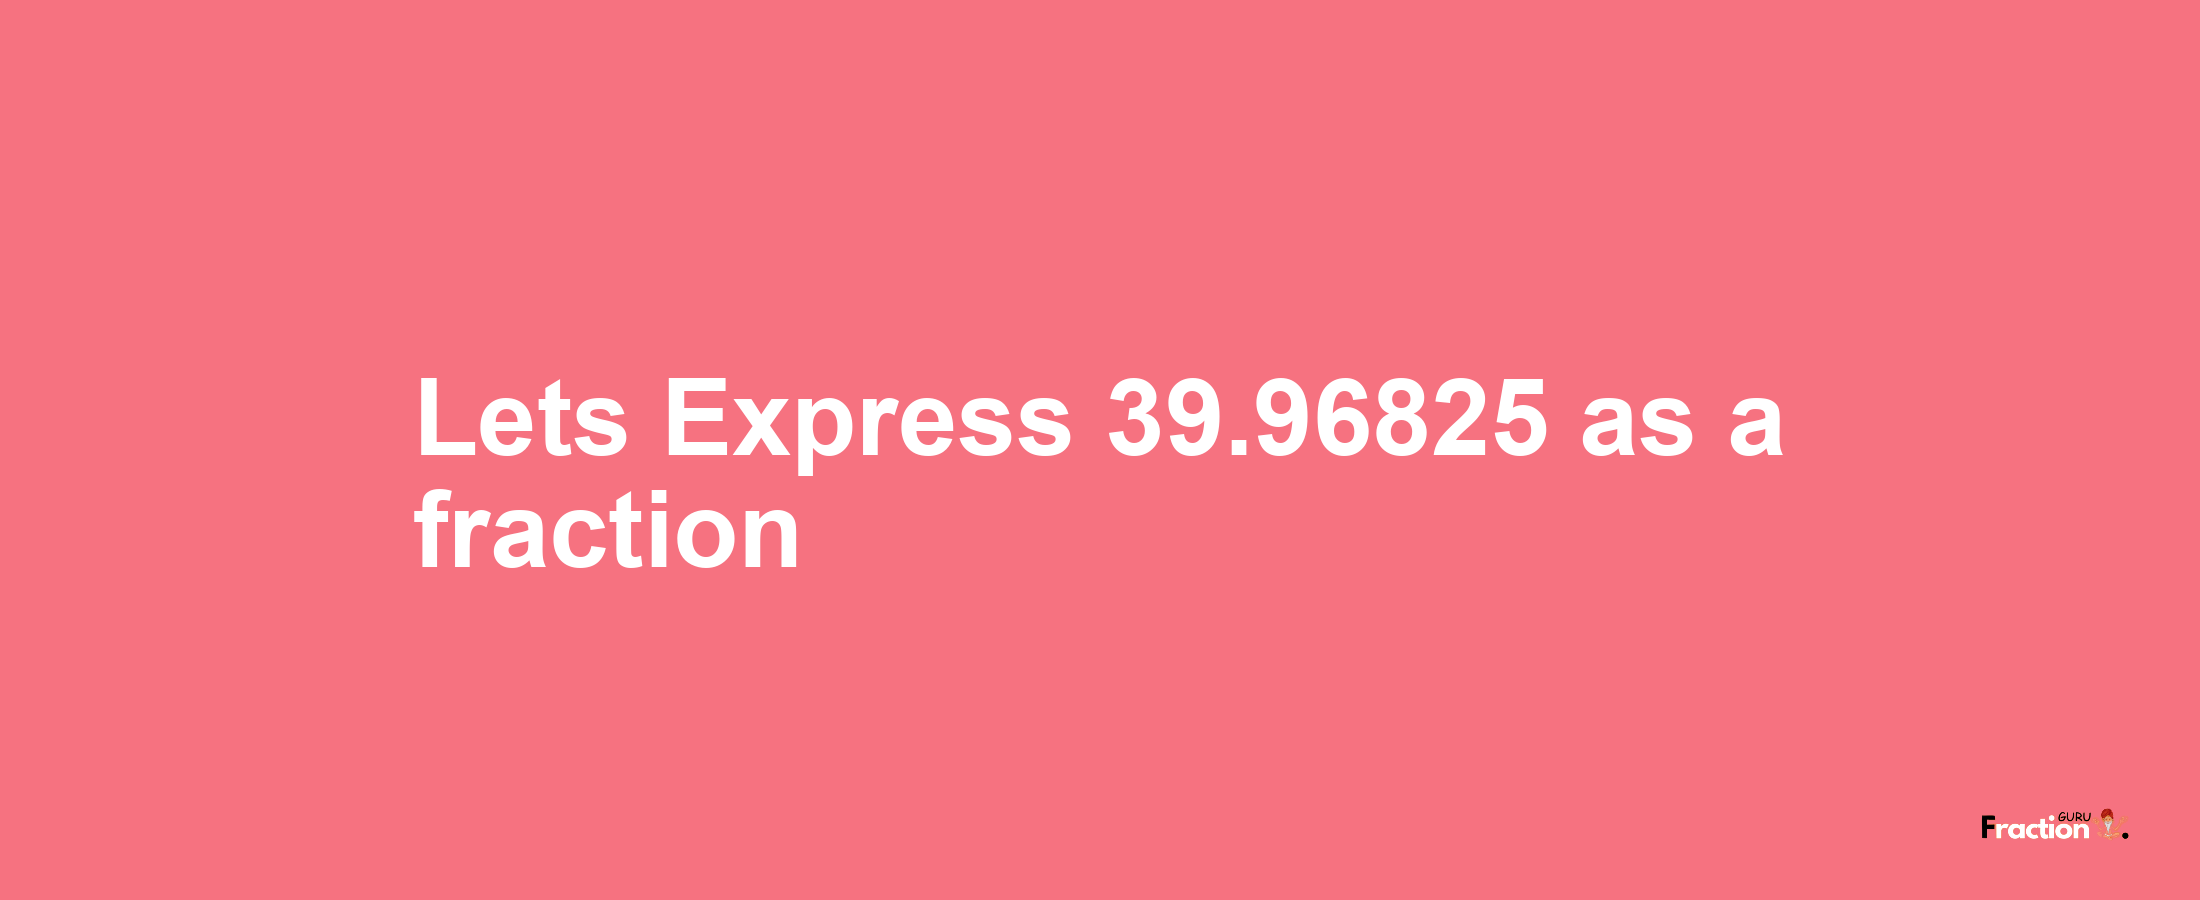 Lets Express 39.96825 as afraction